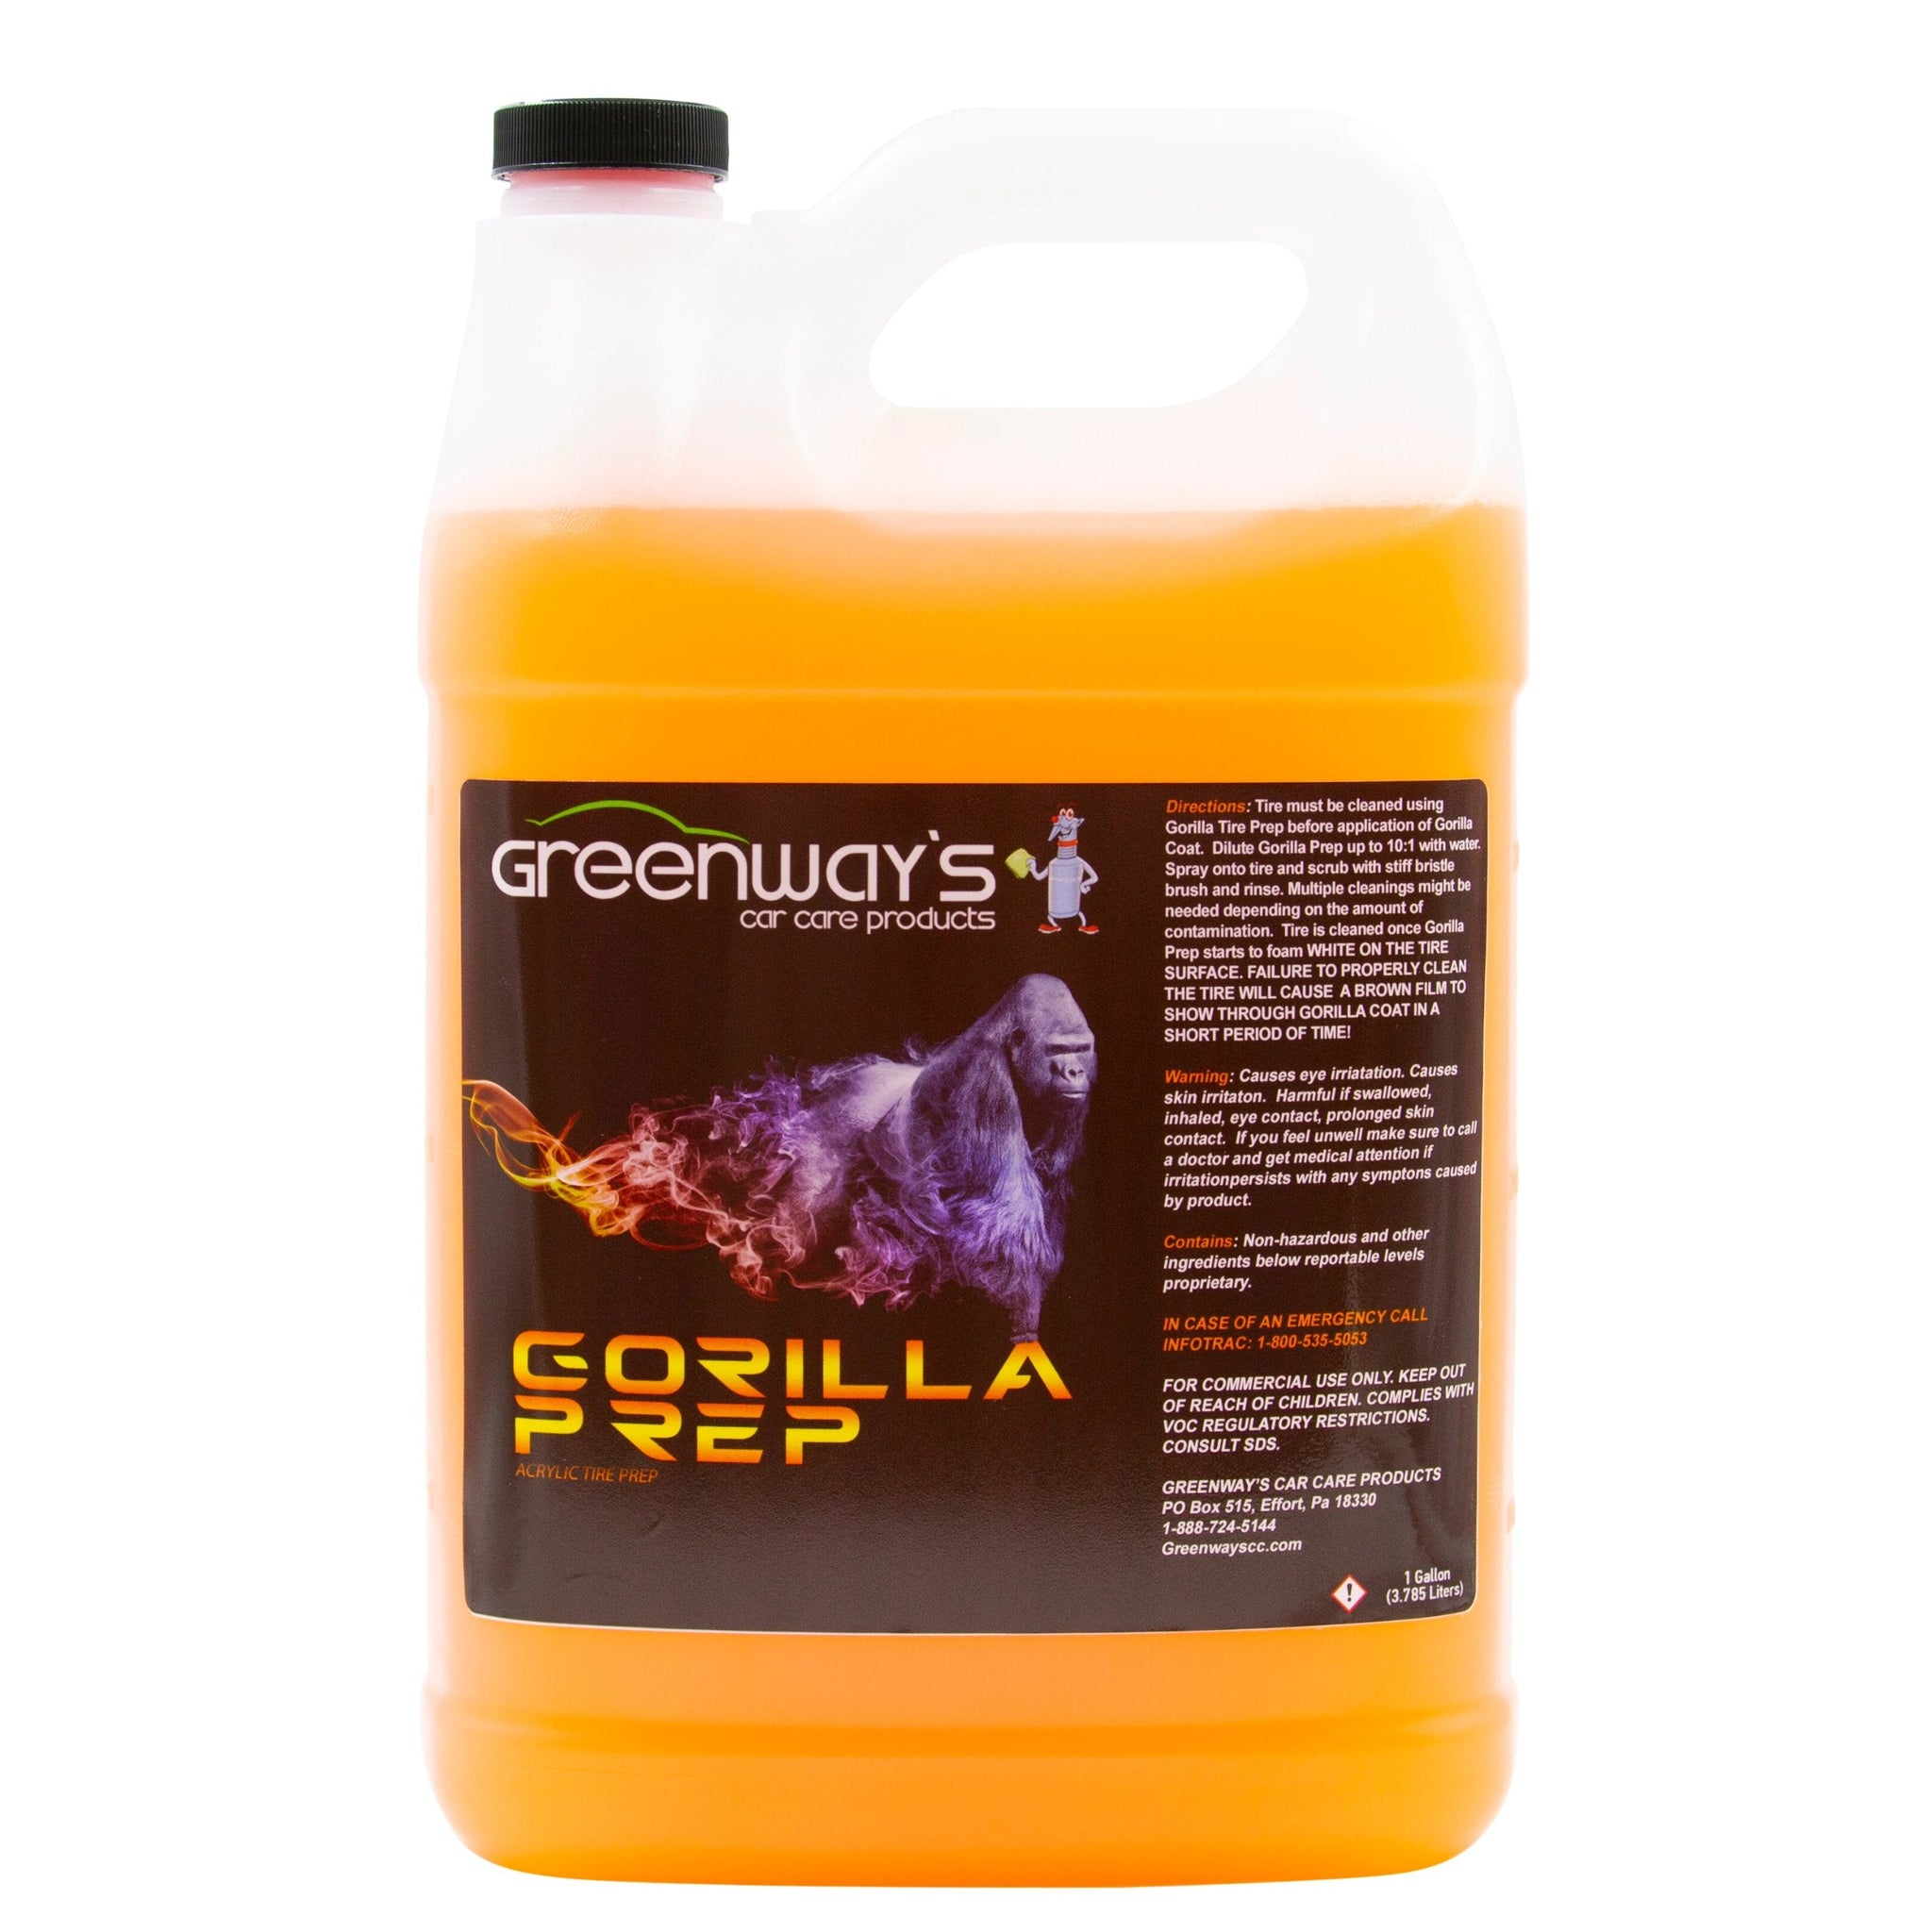 Greenway’s Car Care Products Gorilla Prep, ultra-concentrated foaming acrylic tire shine prep, low or high sheen, 1 gallon.